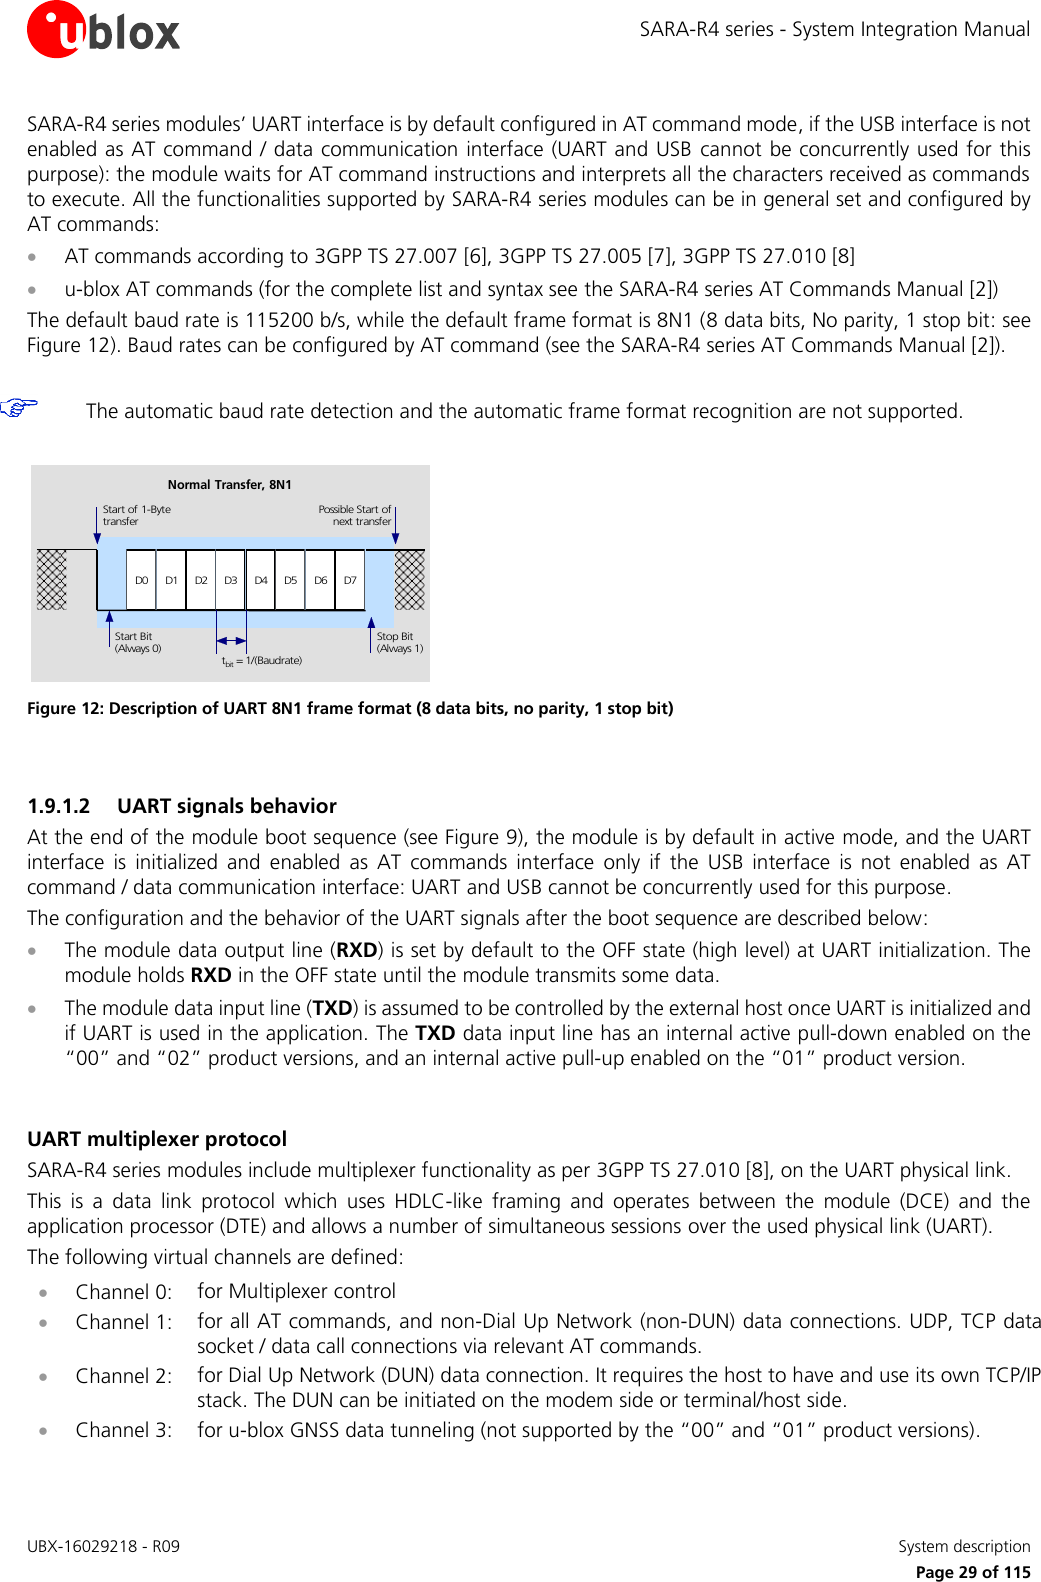 SARA-R4 series - System Integration Manual UBX-16029218 - R09    System description     Page 29 of 115 SARA-R4 series modules’ UART interface is by default configured in AT command mode, if the USB interface is not enabled as AT command / data communication interface (UART and USB cannot be concurrently used for this purpose): the module waits for AT command instructions and interprets all the characters received as commands to execute. All the functionalities supported by SARA-R4 series modules can be in general set and configured by AT commands:  AT commands according to 3GPP TS 27.007 [6], 3GPP TS 27.005 [7], 3GPP TS 27.010 [8]  u-blox AT commands (for the complete list and syntax see the SARA-R4 series AT Commands Manual [2]) The default baud rate is 115200 b/s, while the default frame format is 8N1 (8 data bits, No parity, 1 stop bit: see Figure 12). Baud rates can be configured by AT command (see the SARA-R4 series AT Commands Manual [2]).   The automatic baud rate detection and the automatic frame format recognition are not supported.  D0 D1 D2 D3 D4 D5 D6 D7Start of 1-BytetransferStart Bit(Always 0)Possible Start ofnext transferStop Bit(Always 1)tbit = 1/(Baudrate)Normal Transfer, 8N1 Figure 12: Description of UART 8N1 frame format (8 data bits, no parity, 1 stop bit)   1.9.1.2 UART signals behavior At the end of the module boot sequence (see Figure 9), the module is by default in active mode, and the UART interface  is  initialized  and  enabled  as  AT  commands  interface  only  if  the  USB  interface  is  not  enabled  as  AT command / data communication interface: UART and USB cannot be concurrently used for this purpose. The configuration and the behavior of the UART signals after the boot sequence are described below:  The module data output line (RXD) is set by default to the OFF state (high level) at UART initialization. The module holds RXD in the OFF state until the module transmits some data.   The module data input line (TXD) is assumed to be controlled by the external host once UART is initialized and if UART is used in the application. The TXD data input line has an internal active pull-down enabled on the “00” and “02” product versions, and an internal active pull-up enabled on the “01” product version.   UART multiplexer protocol SARA-R4 series modules include multiplexer functionality as per 3GPP TS 27.010 [8], on the UART physical link.  This  is  a  data  link  protocol  which  uses  HDLC-like  framing  and  operates  between  the  module  (DCE)  and  the application processor (DTE) and allows a number of simultaneous sessions over the used physical link (UART).  The following virtual channels are defined:  Channel 0: for Multiplexer control  Channel 1: for all AT commands, and non-Dial Up Network (non-DUN) data connections. UDP, TCP data socket / data call connections via relevant AT commands.  Channel 2: for Dial Up Network (DUN) data connection. It requires the host to have and use its own TCP/IP stack. The DUN can be initiated on the modem side or terminal/host side.  Channel 3: for u-blox GNSS data tunneling (not supported by the “00” and “01” product versions).  